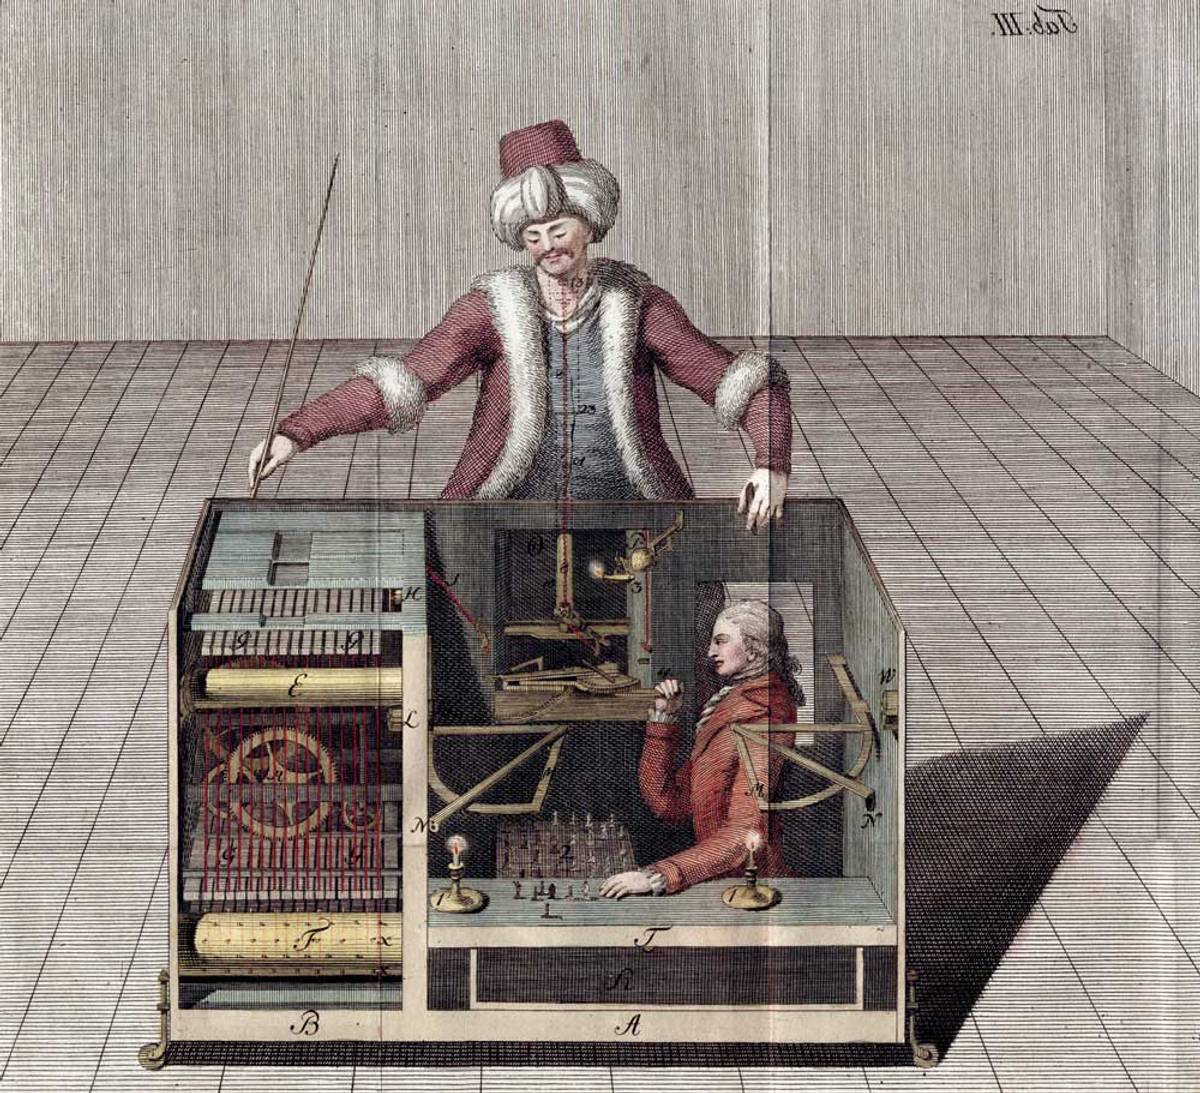 The Mechanical Turk,  a fraudulent chess-playing machine constructed in 1770, which appeared to be able to play a strong game of chess against a human opponent